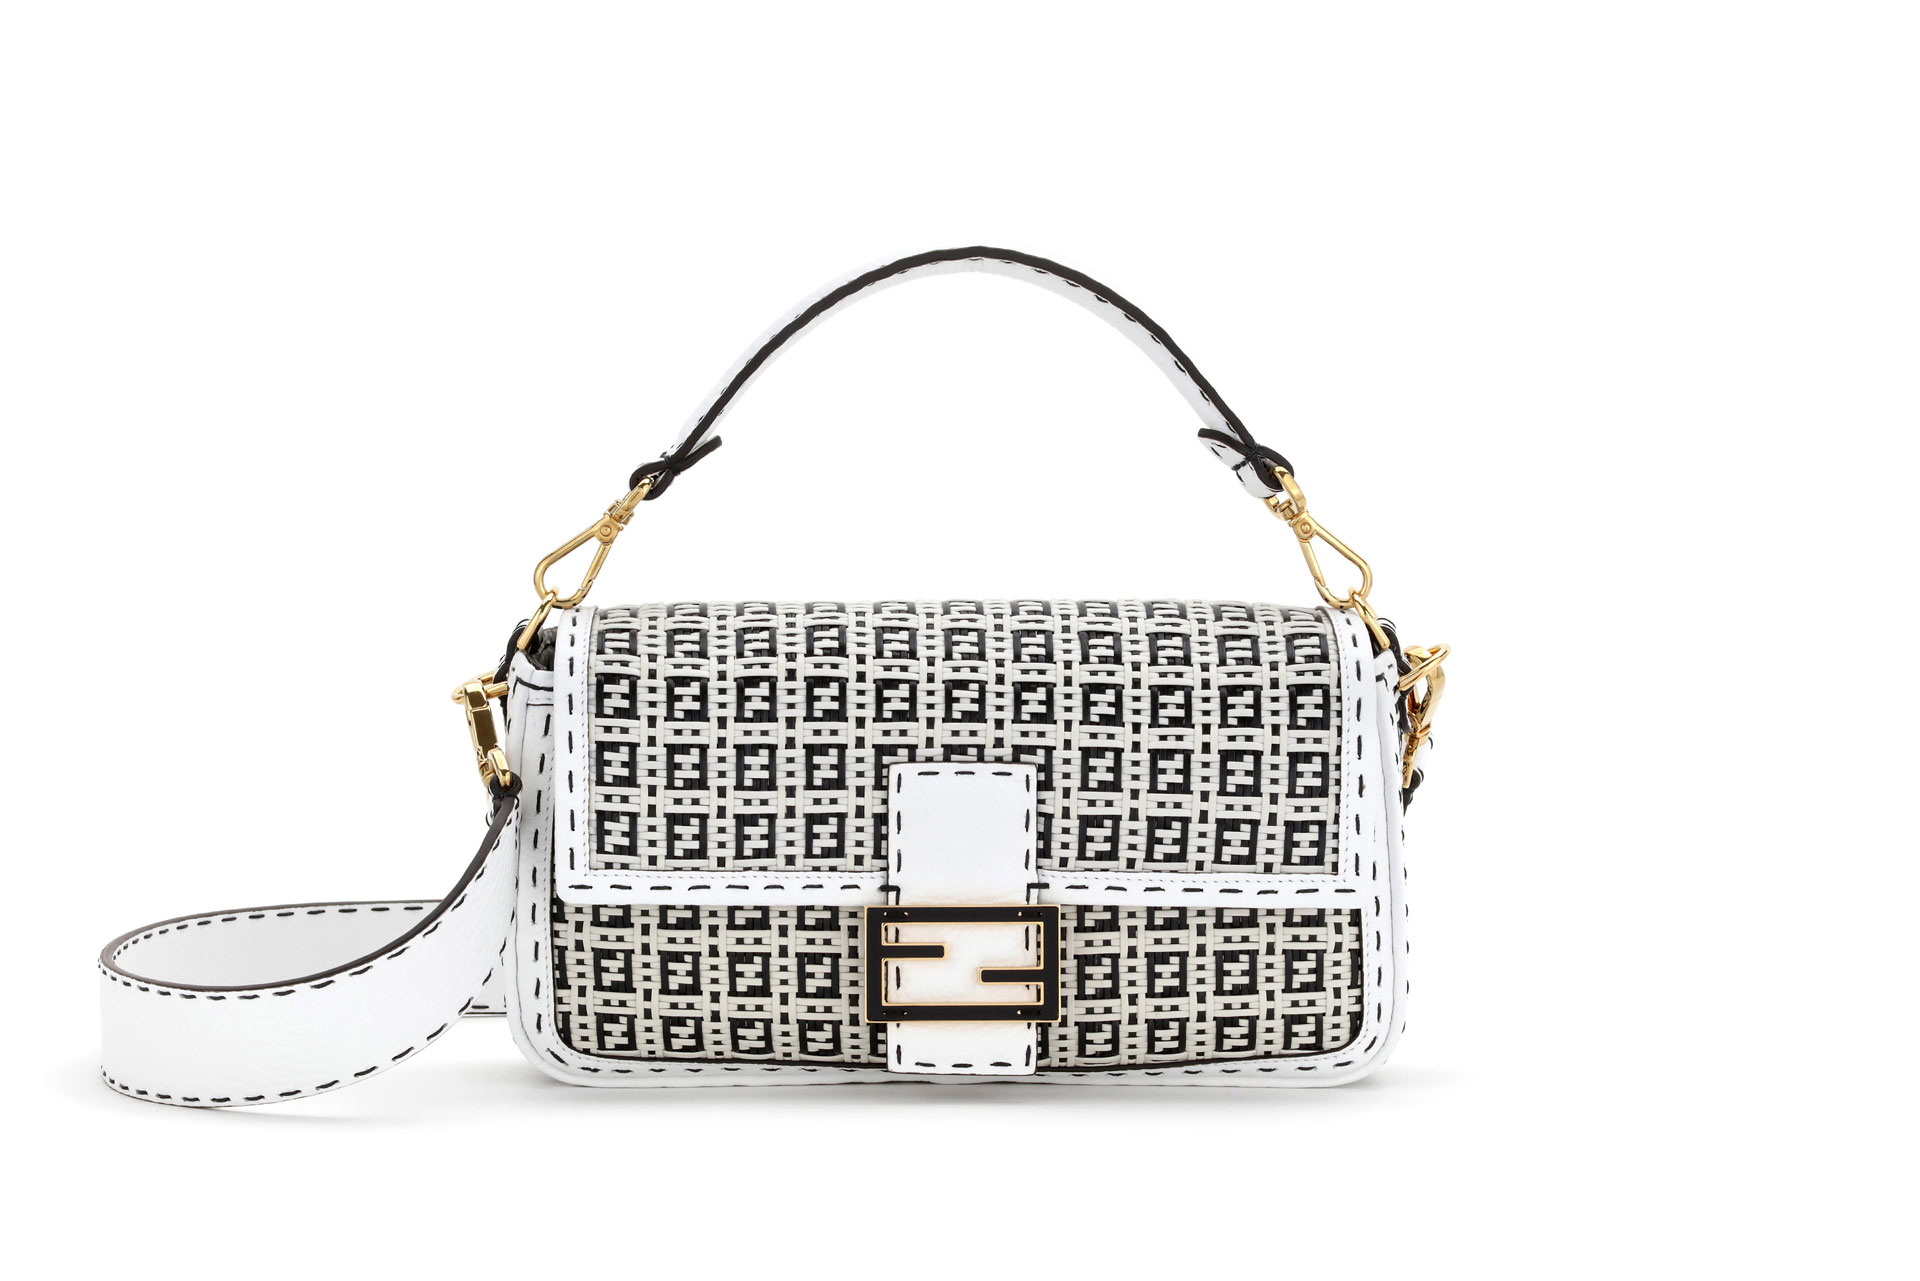 The Fendi Baguette is Trending – Thanks to Carrie Bradshaw | Baguette Bags